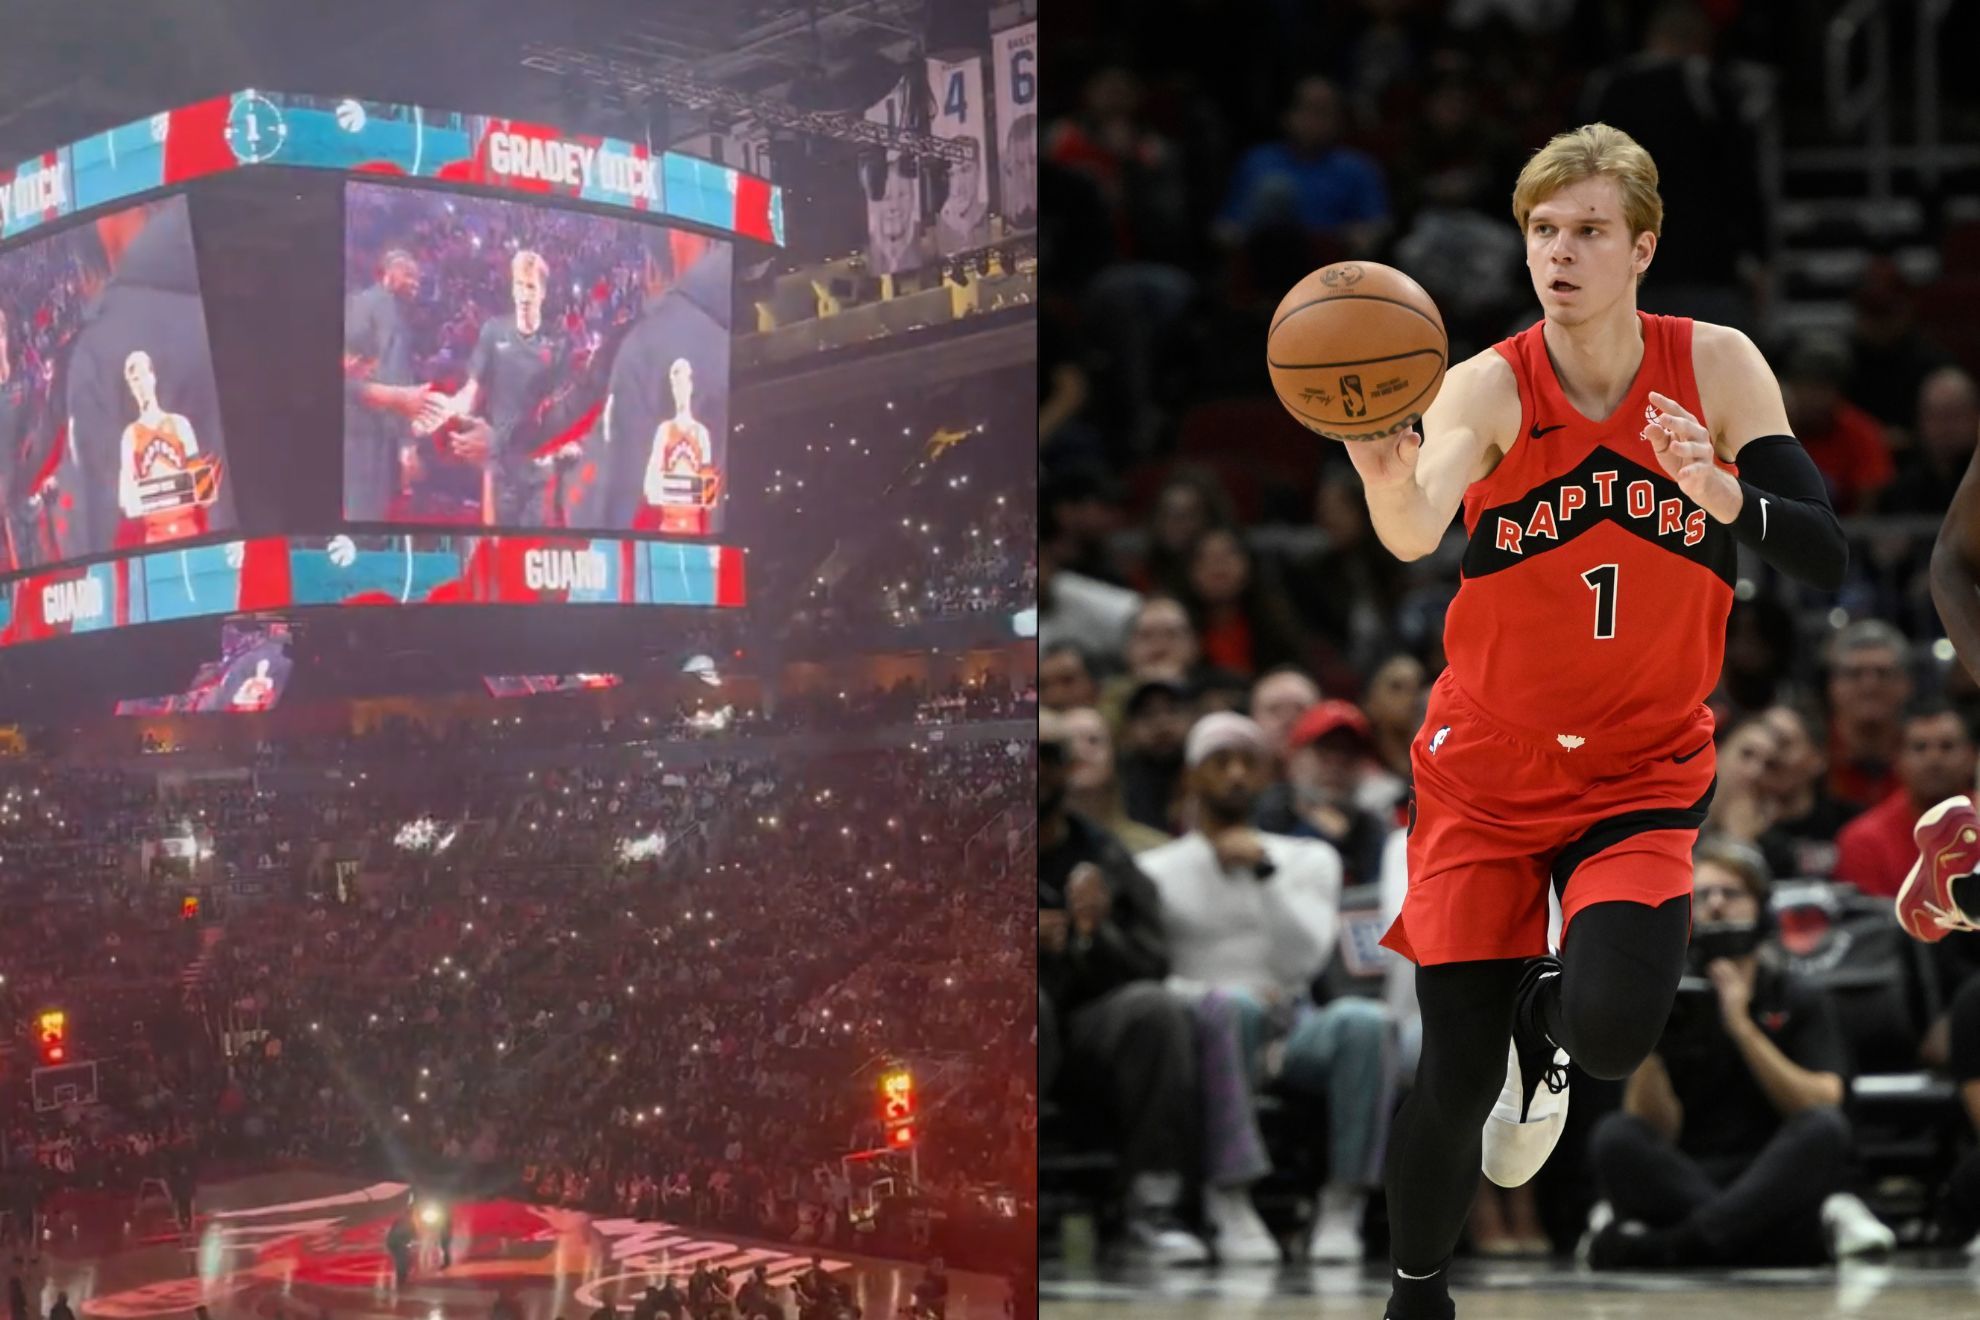 Gradey Dick was in the Raptor's starting lineup for the first time, against the Bucks.